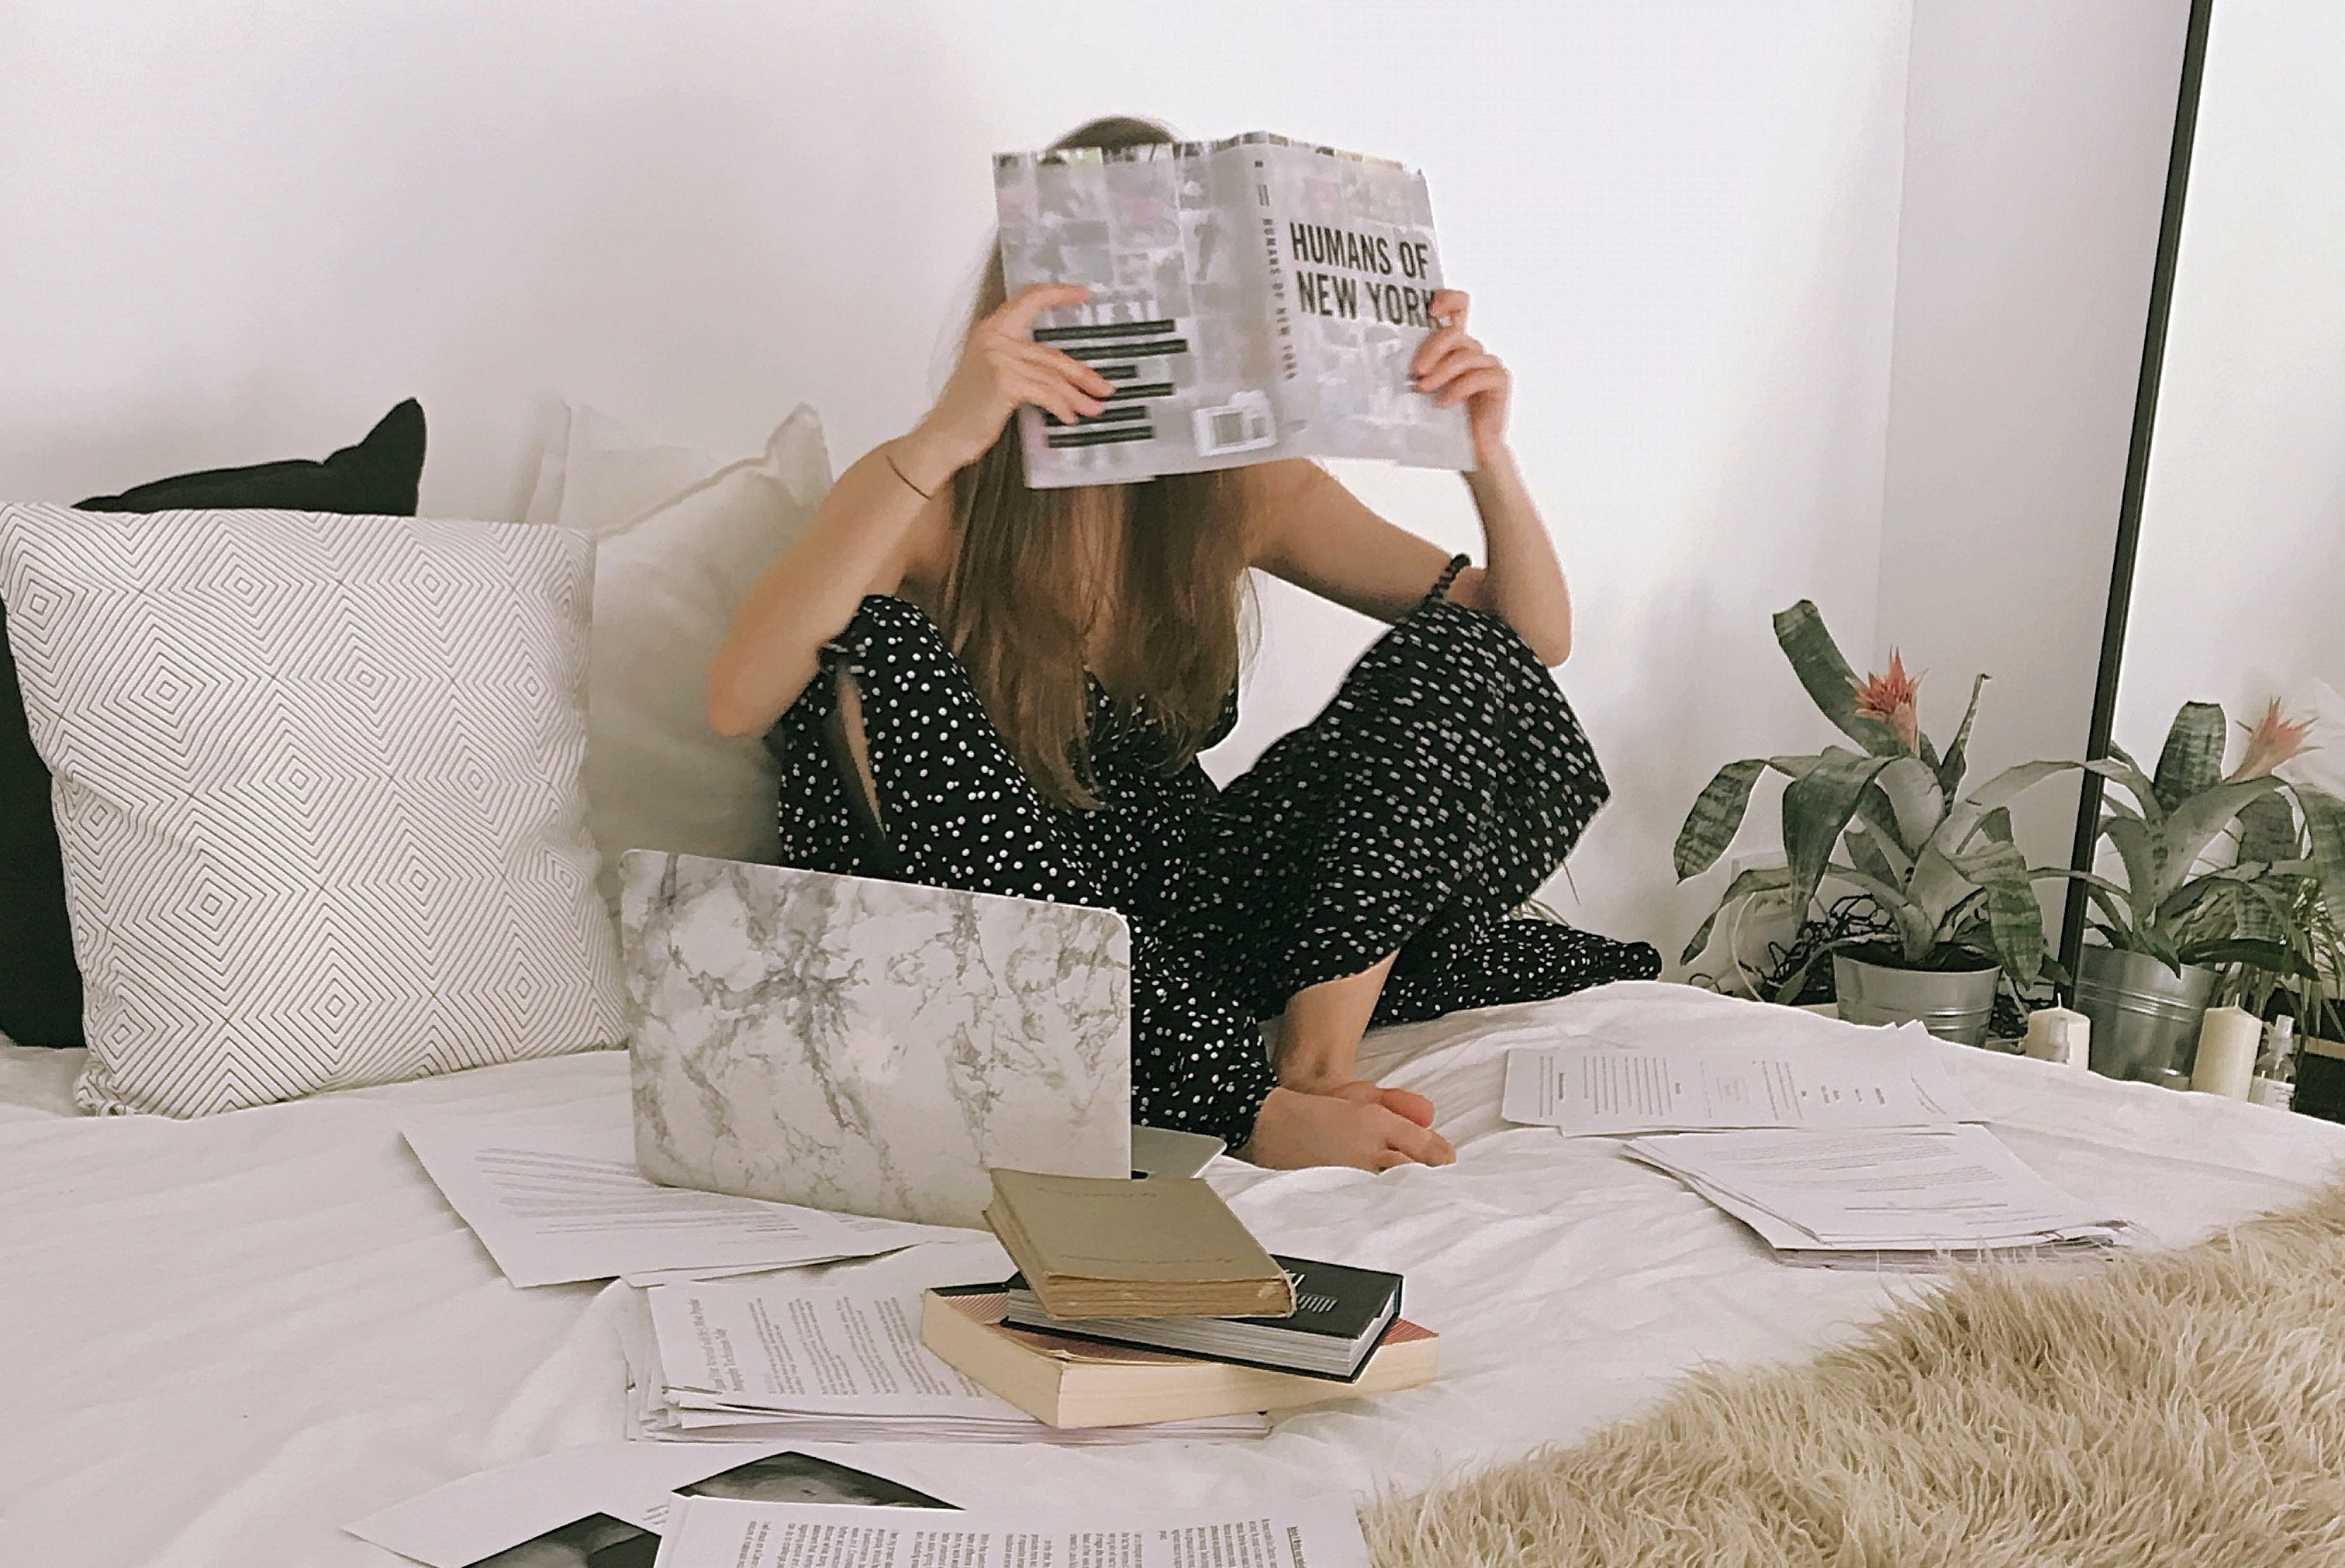 Photo of a woman sitting on a bed with a laptop, surrounded by books and papers.